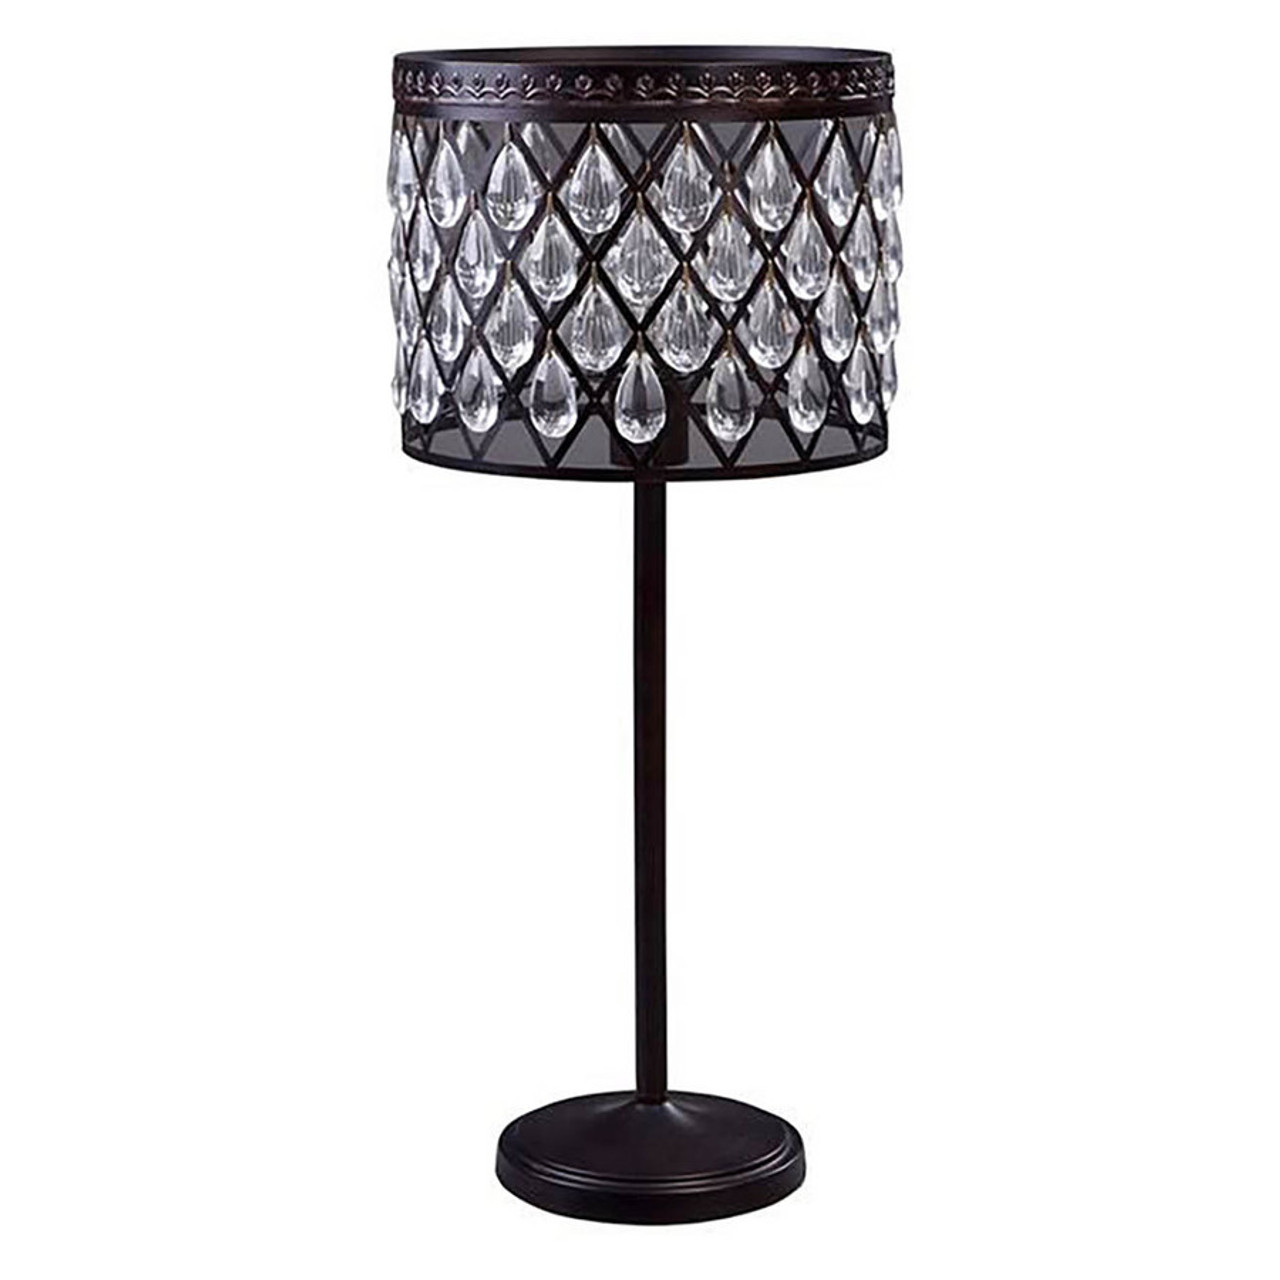 allen roth outdoor table lamp